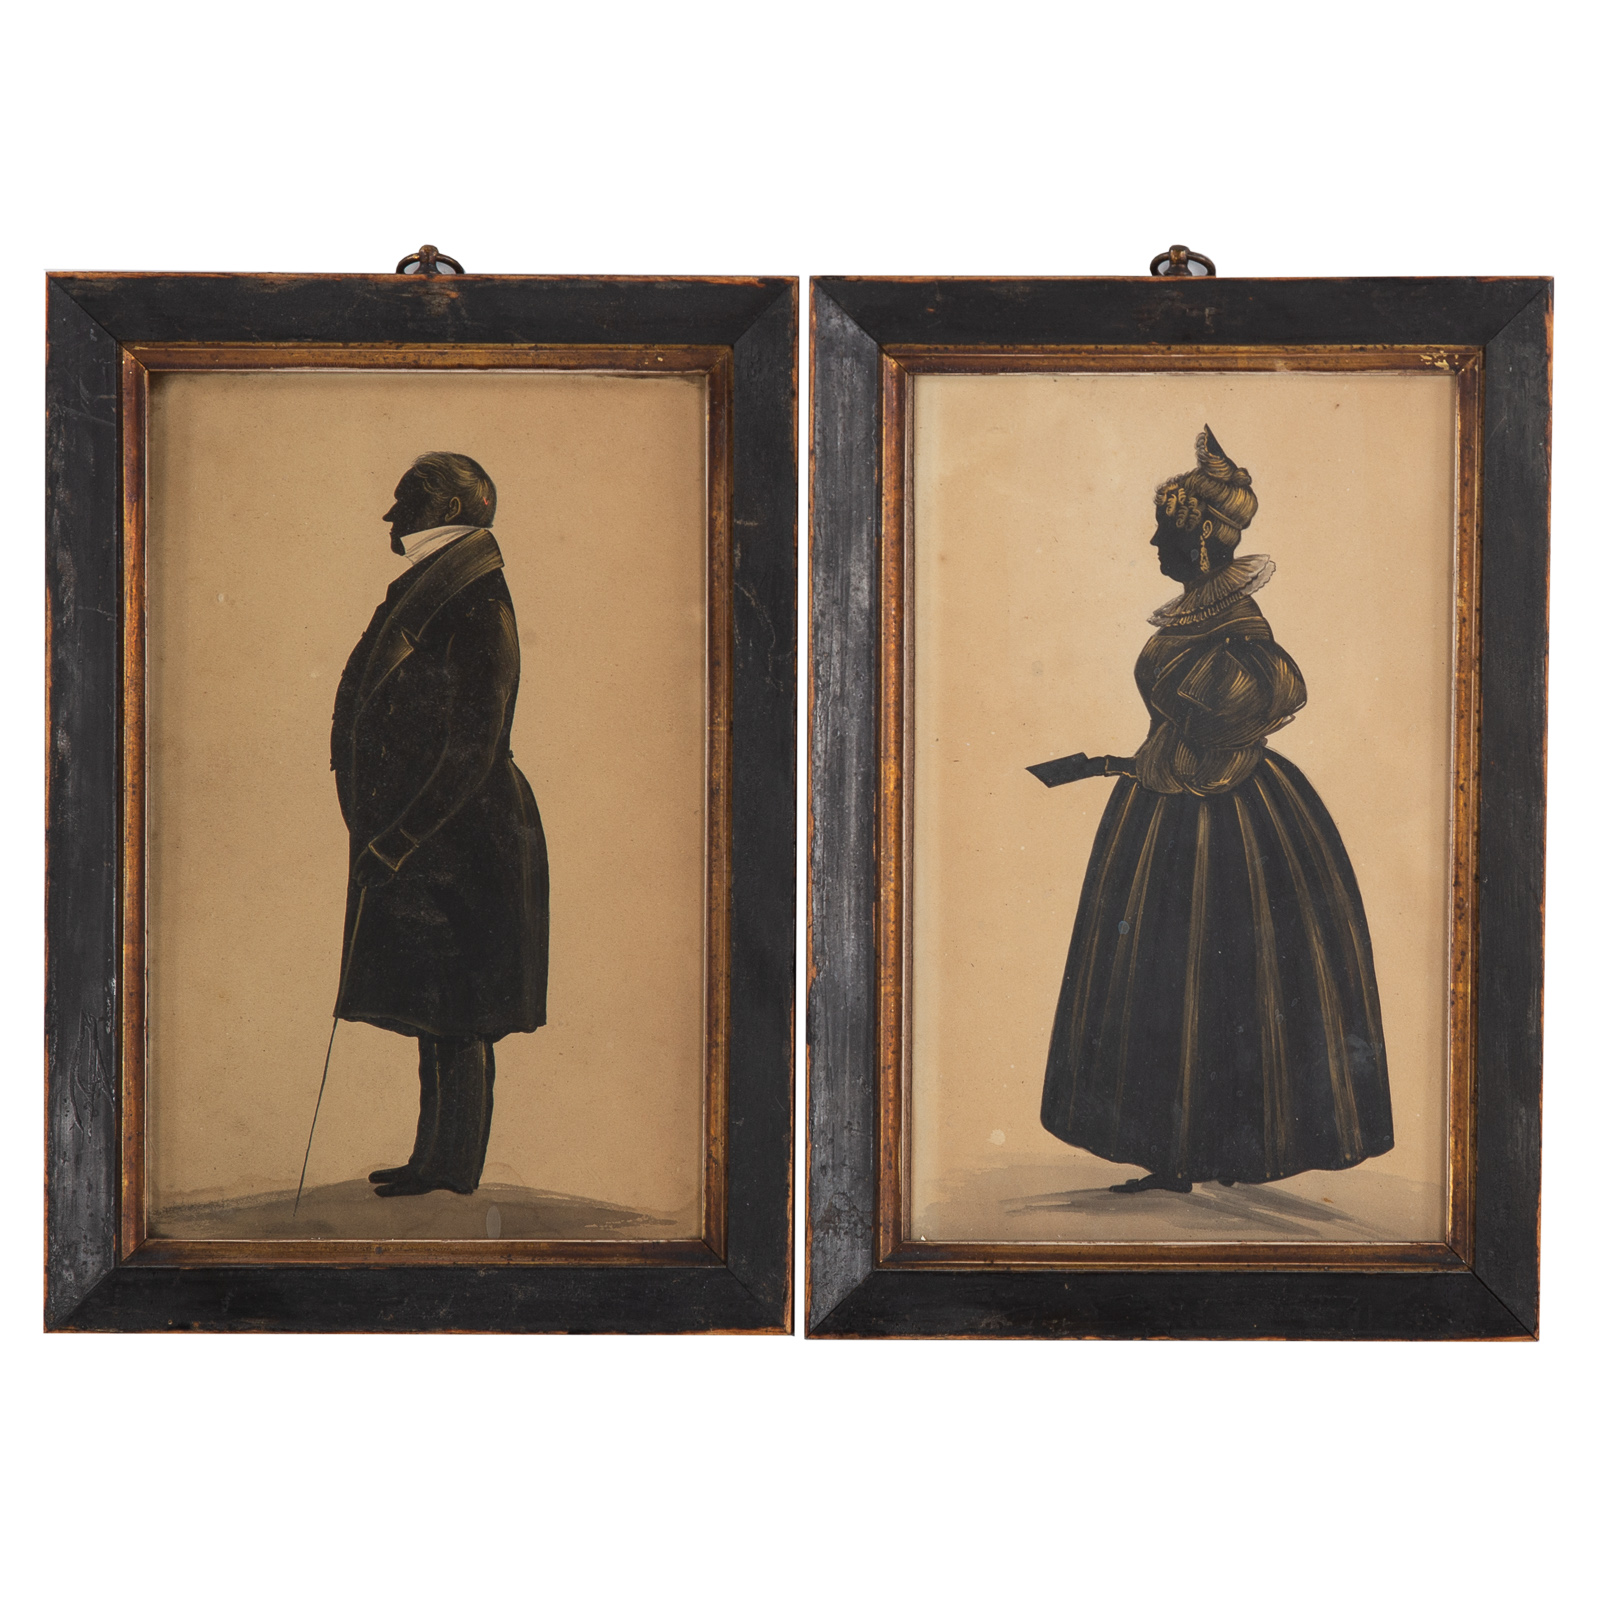 A PAIR OF WILLIAM IV PAINTED SILHOUETTES